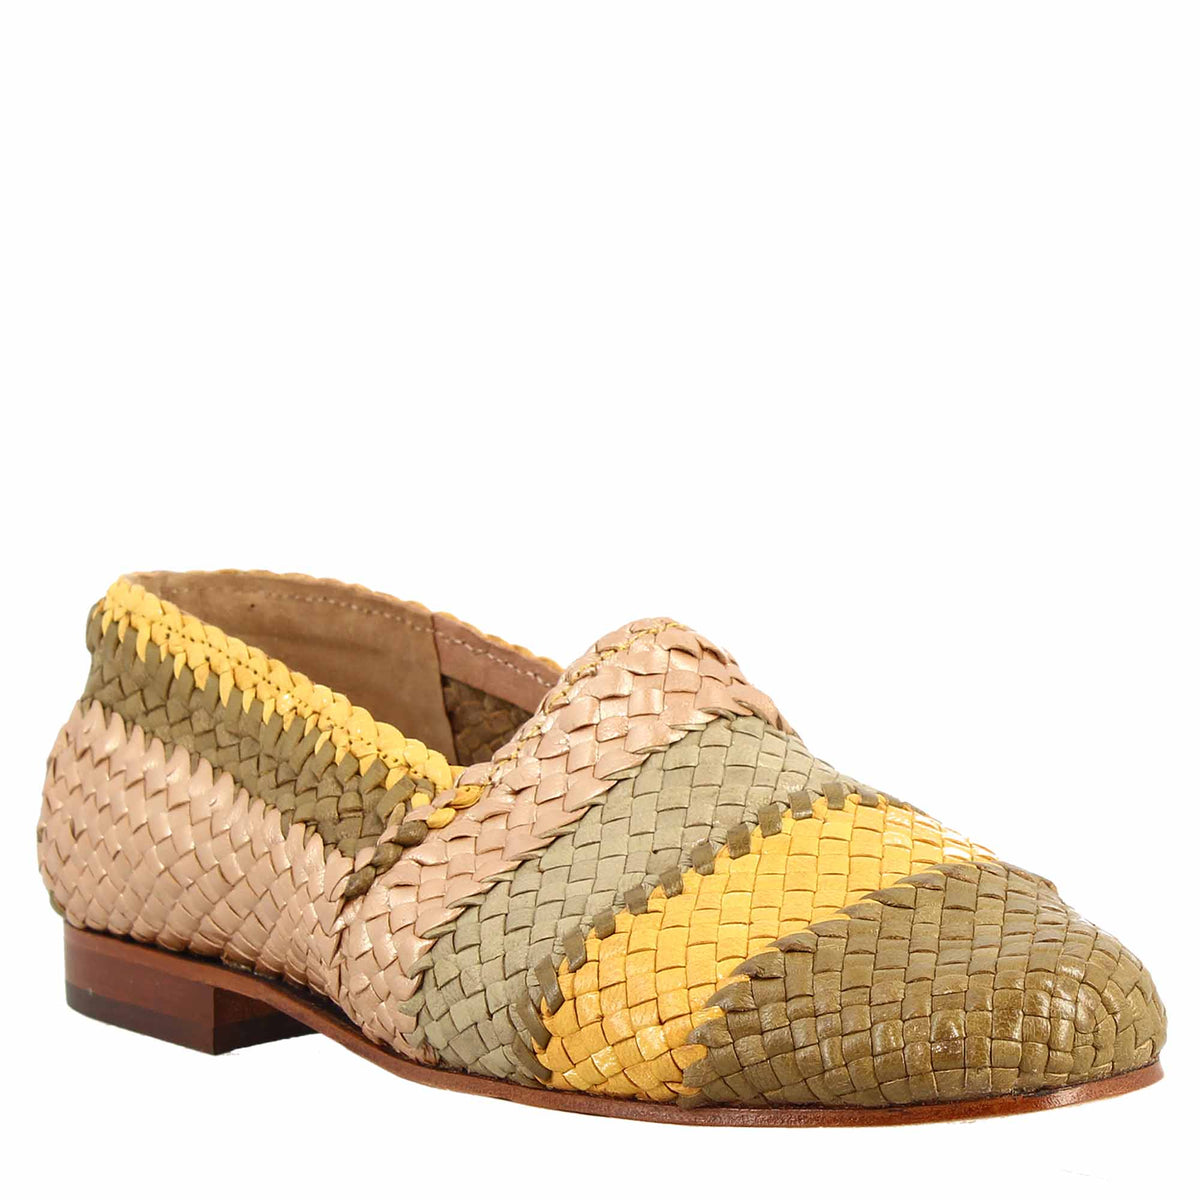 Handmade women's moccasins in green, yellow and beige woven leather 